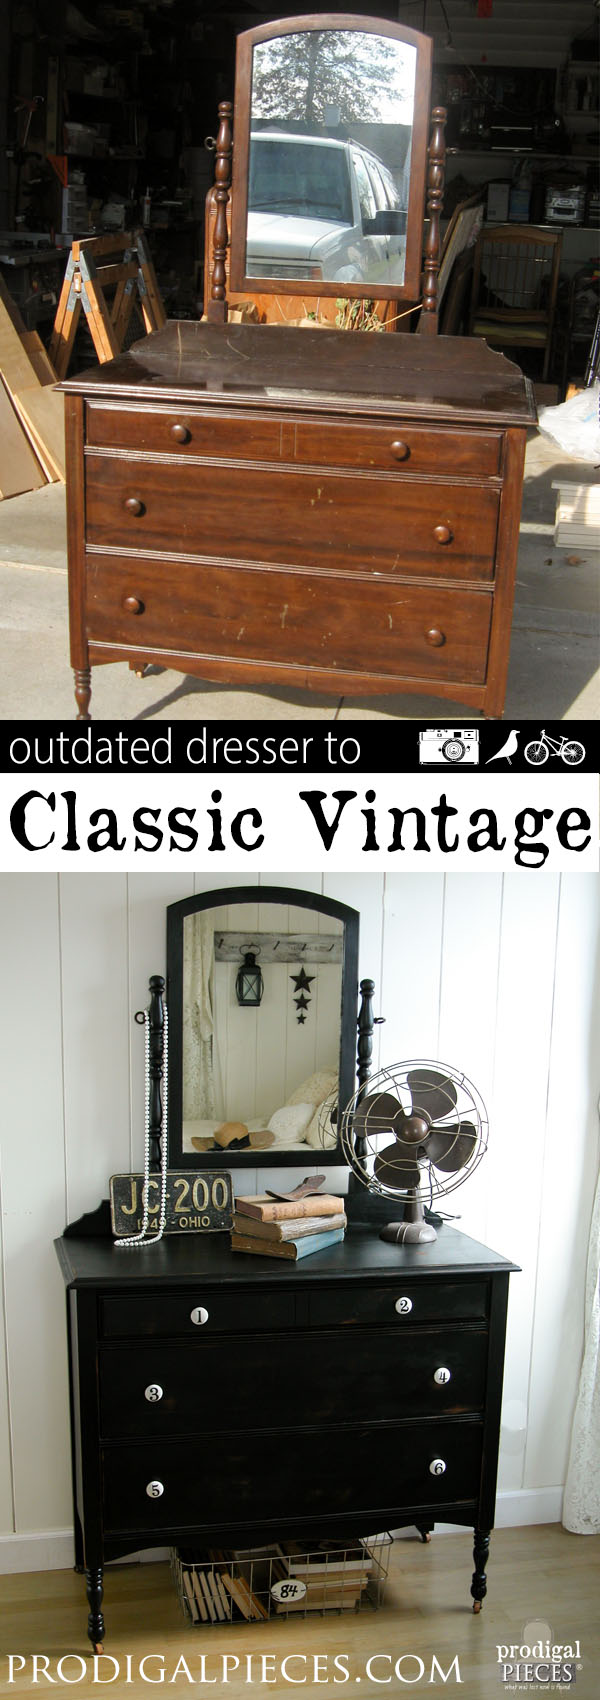 Outdated Dresser Given New Vintage Chic Style Makeover by Prodigal Pieces | www.prodigalpieces.com